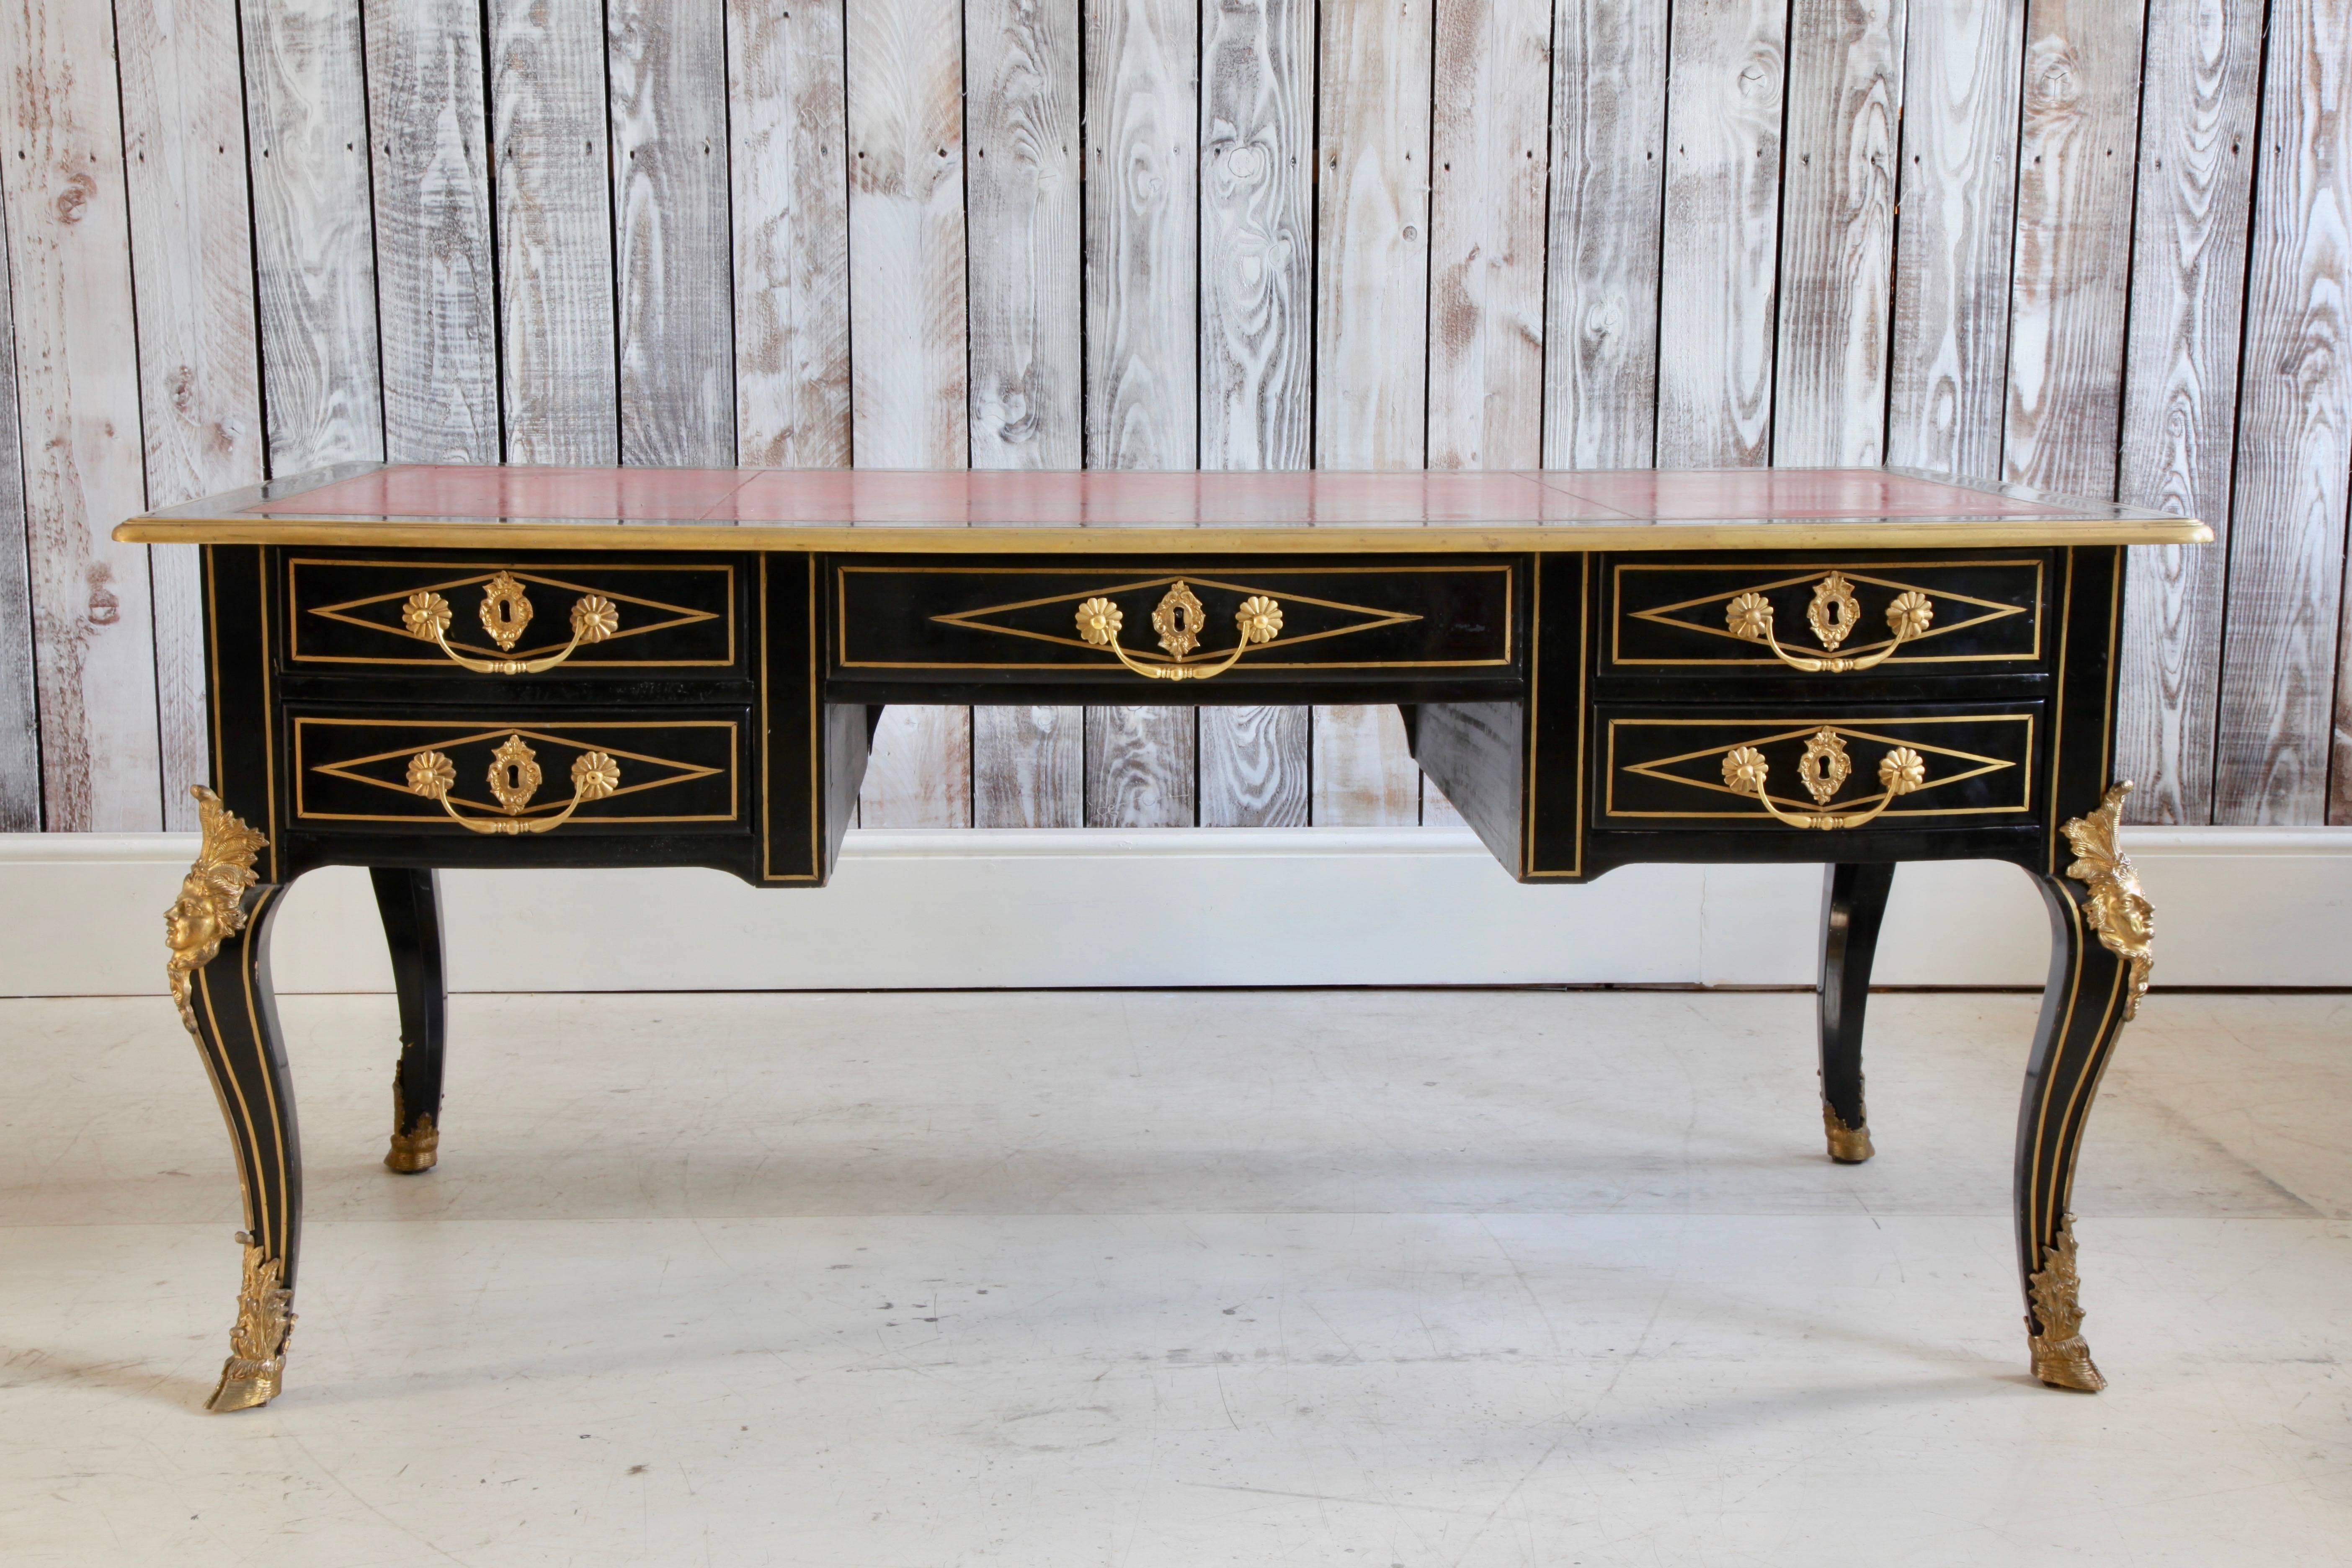 19th century, French writing desk designed in the Louis XIV Bureau Plat style made in ebonised wood. The charcoal black tones of the wood's patina makes for a striking contrast to the warm bright tones of the bronze inlay used to underscore the